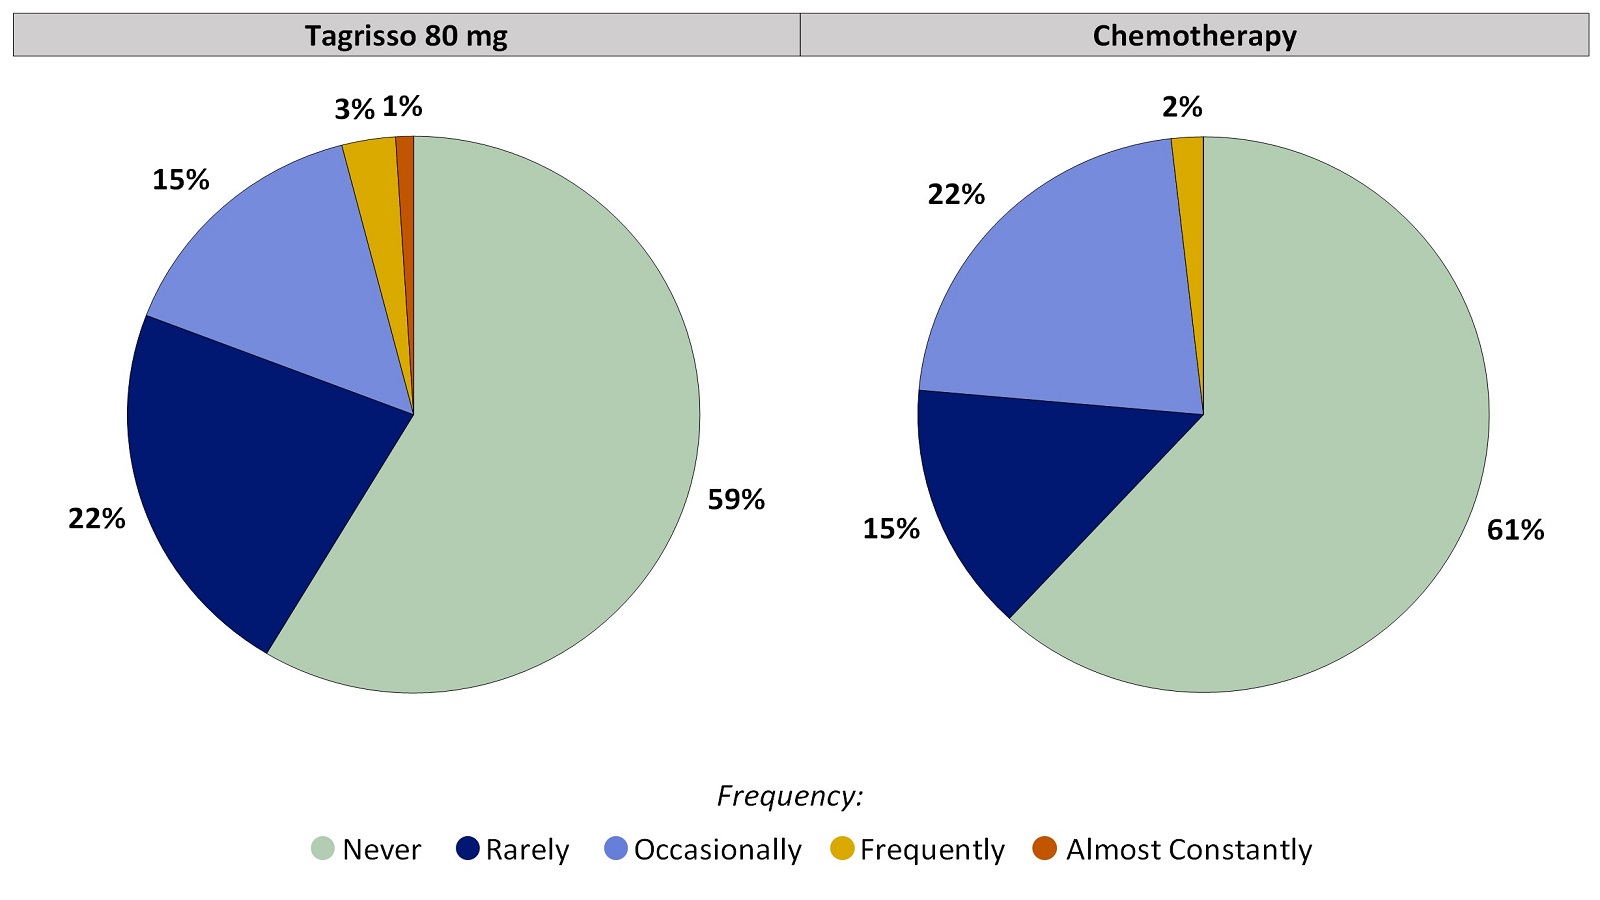 Two pie charts, one for Tagrisso and the other for chemotherapy, summarizing the percentage of patients by worst reported nosebleeds during the first 24 weeks of the clinical trial. In the Tagrisso arm, Never (59%), Rarely (22%), Occasionally (15%), Frequently (3%) and Almost constantly (1%). In the chemotherapy arm, Never (61%), Rarely (15%), Occasionally (22%), Frequently (2%) and Almost constantly (0%).